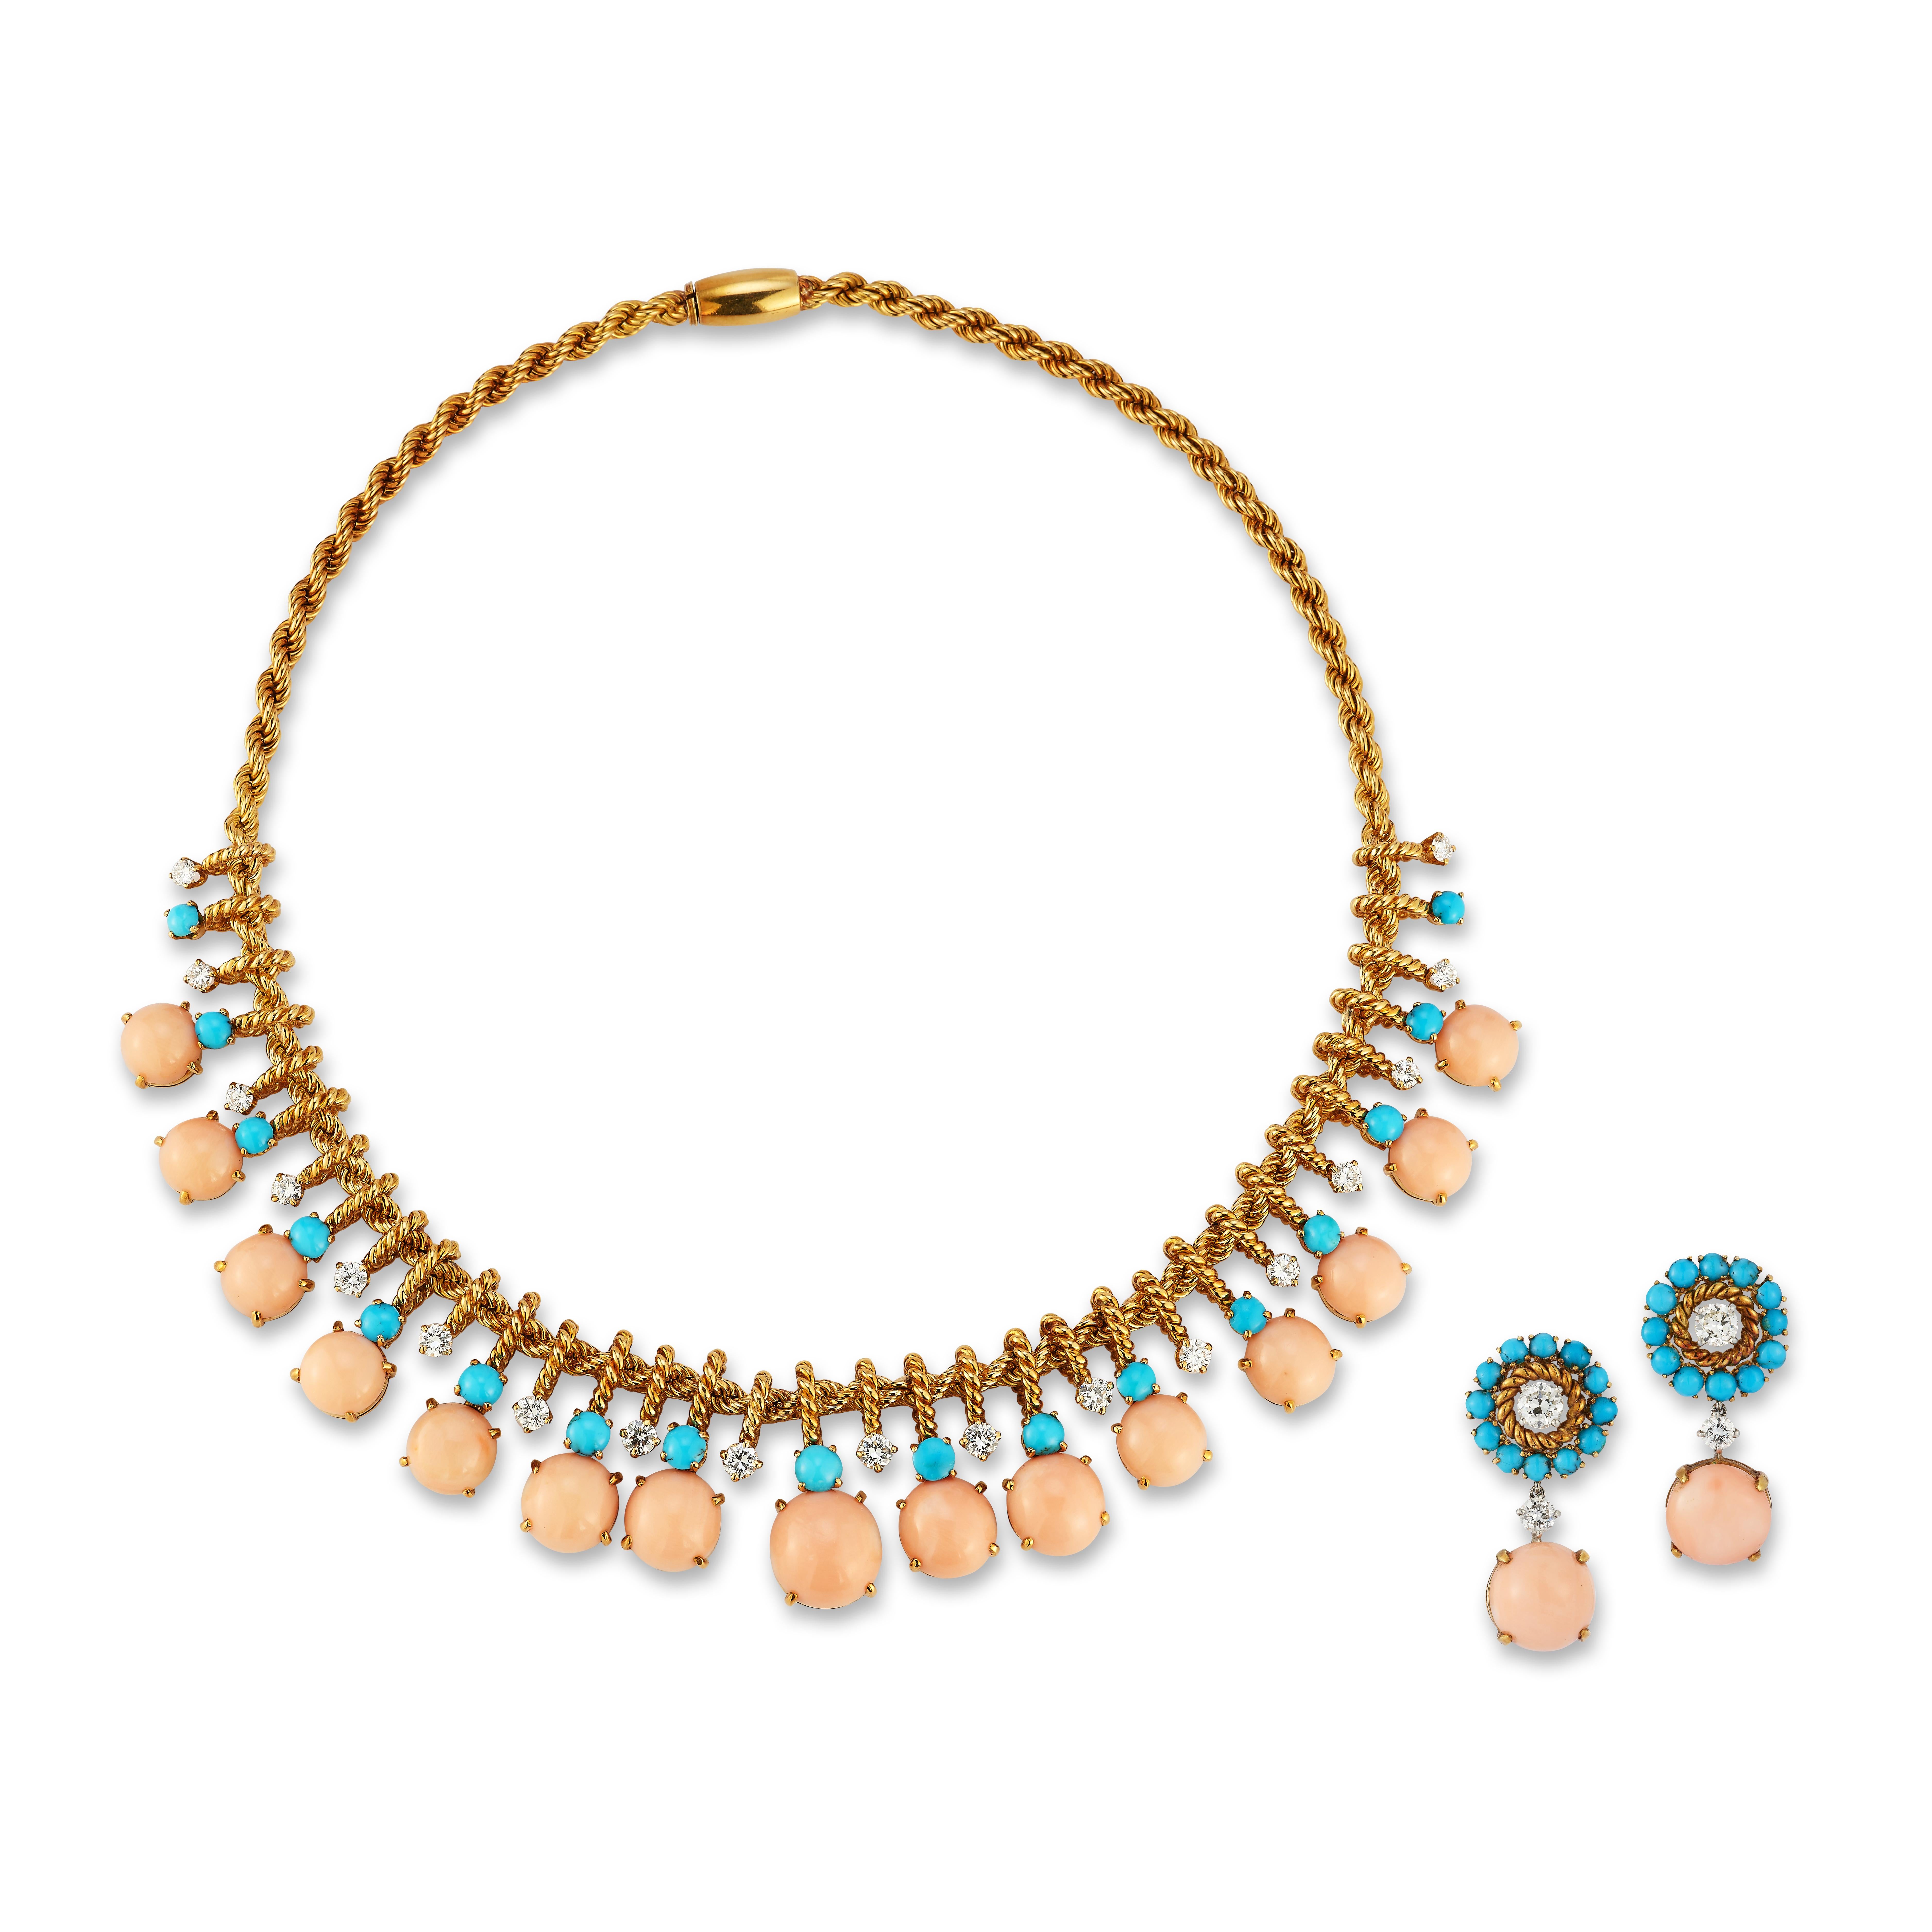 Iconic Van Cleef & Arpels Coral & Turquoise Necklace & Earrings Set

Both the necklace and earrings set with round cut diamonds, cabochon angel skin coral, and turquoise

Necklace Signed Van Cleef & Arpels NY and numbered
Earrings Signed Van Cleef &